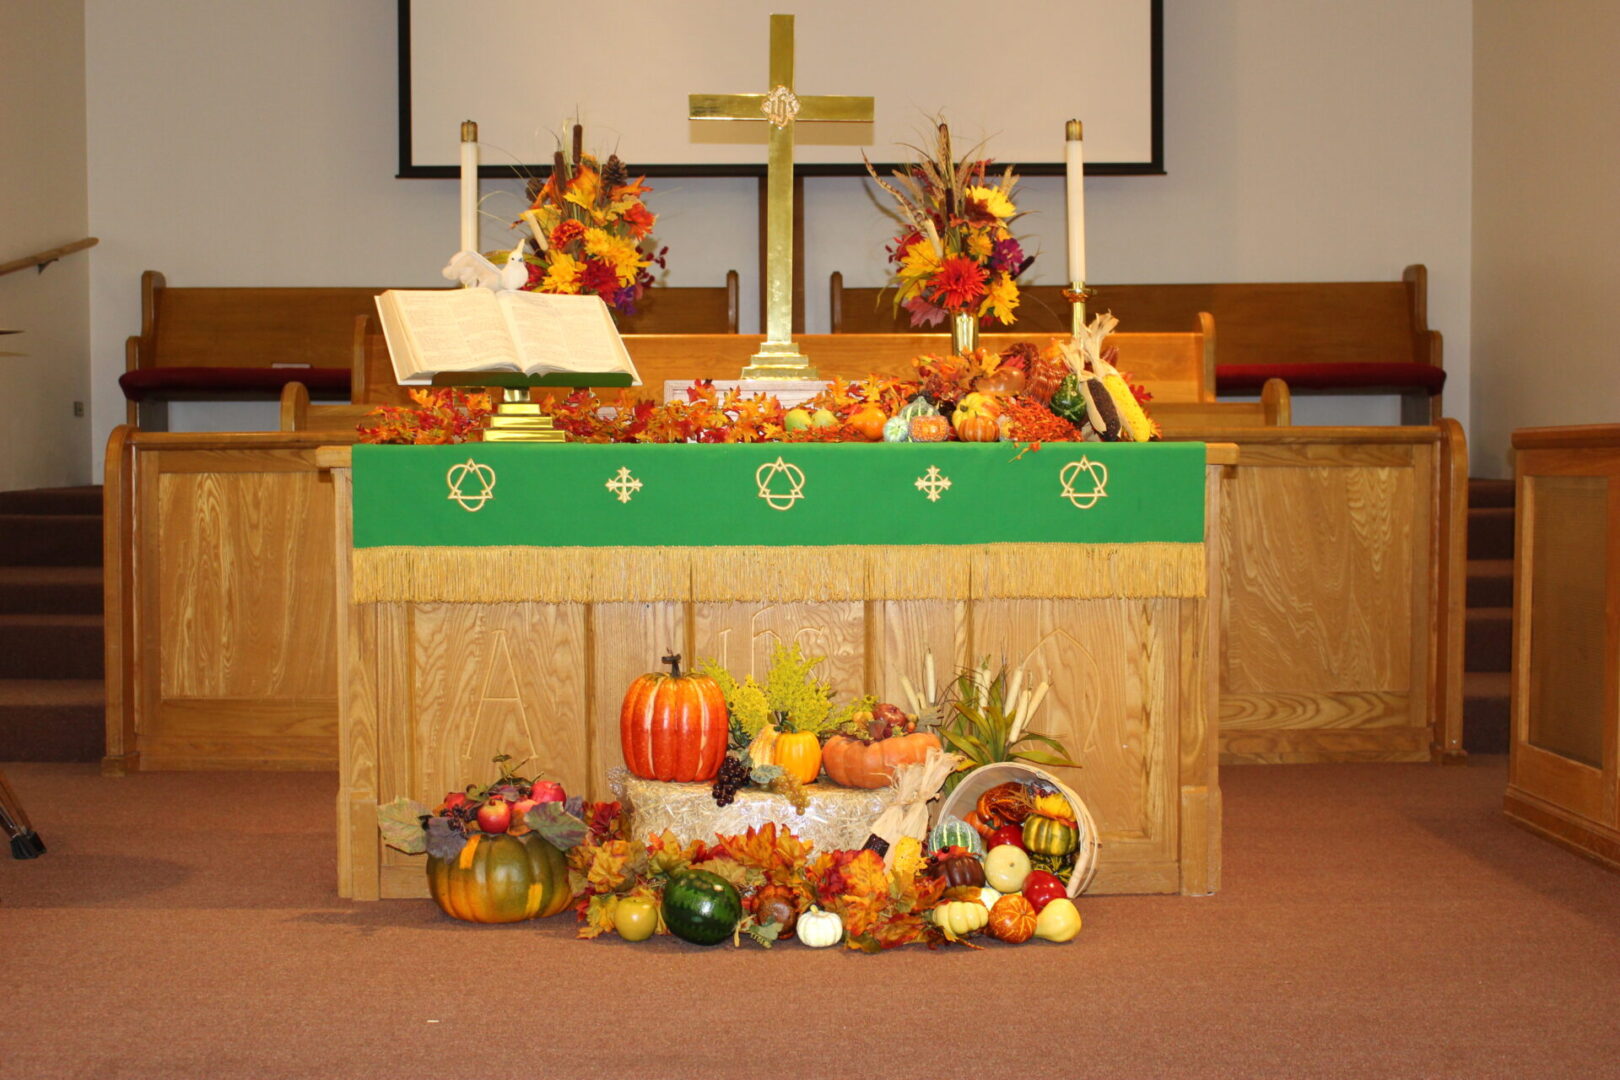 A church with many fruits and vegetables on the alter.